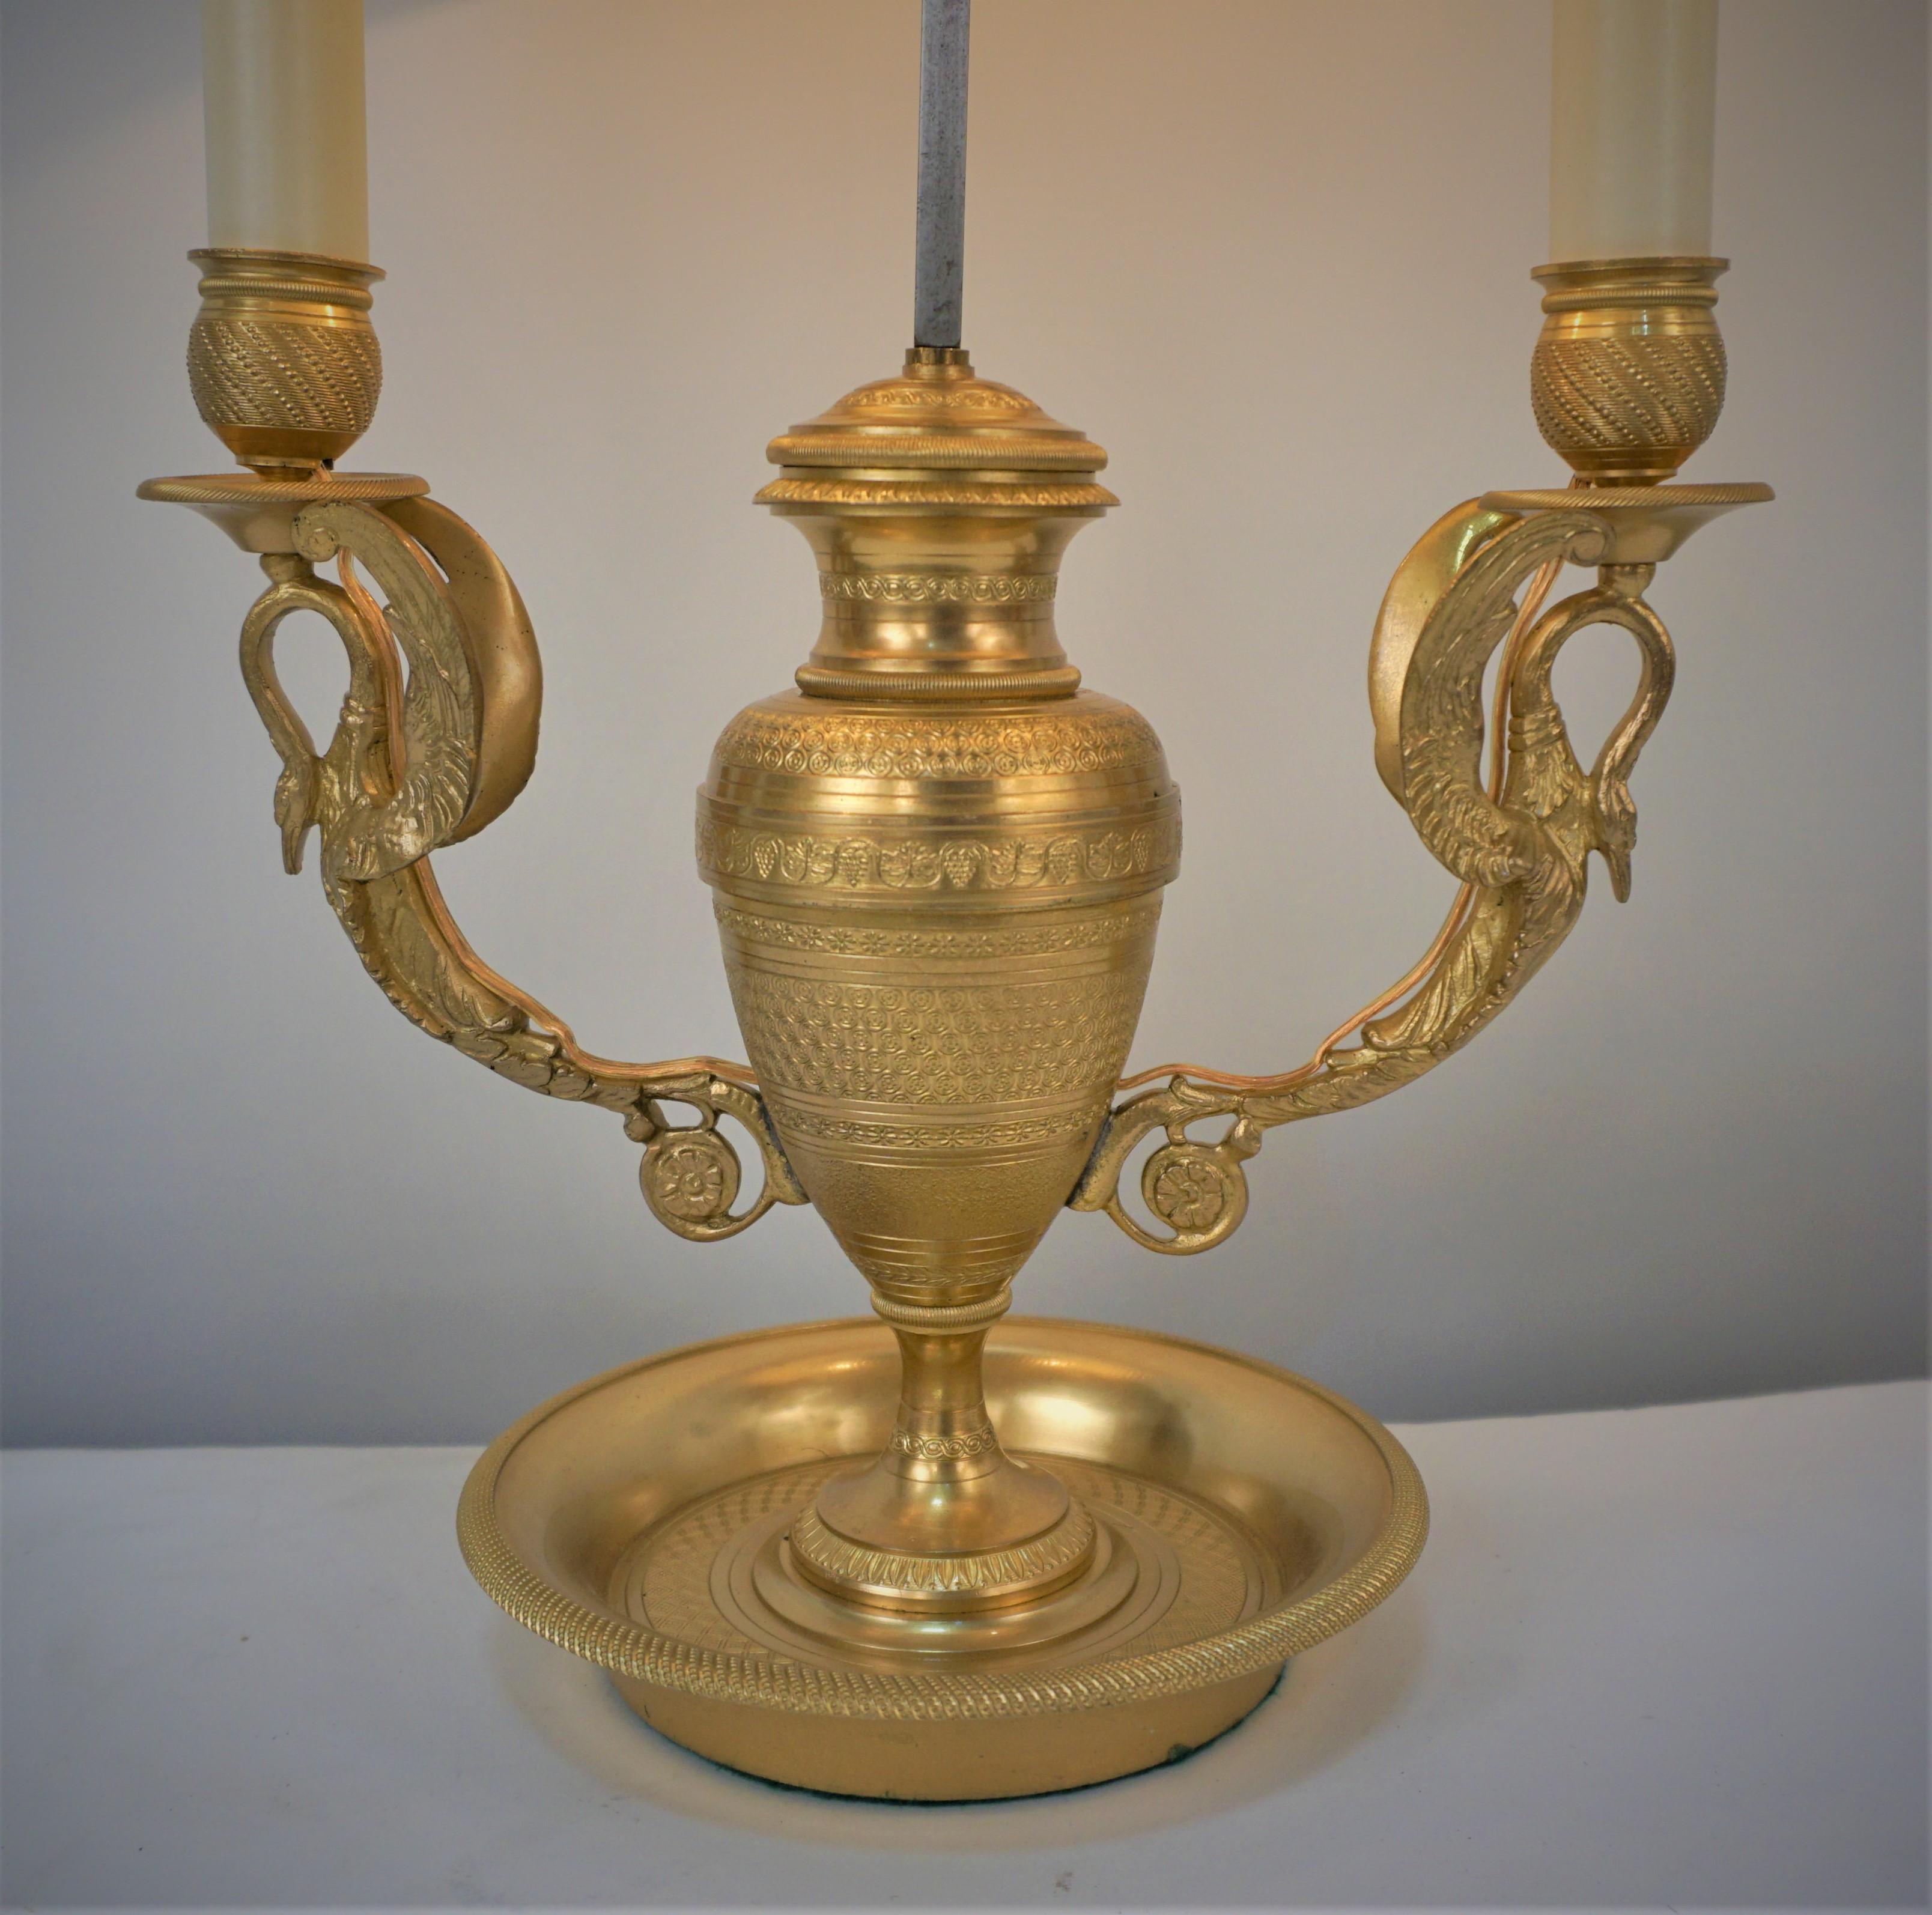 Gilt bronze double swan arms bouillotte desk/table lamp with ovel red shade.